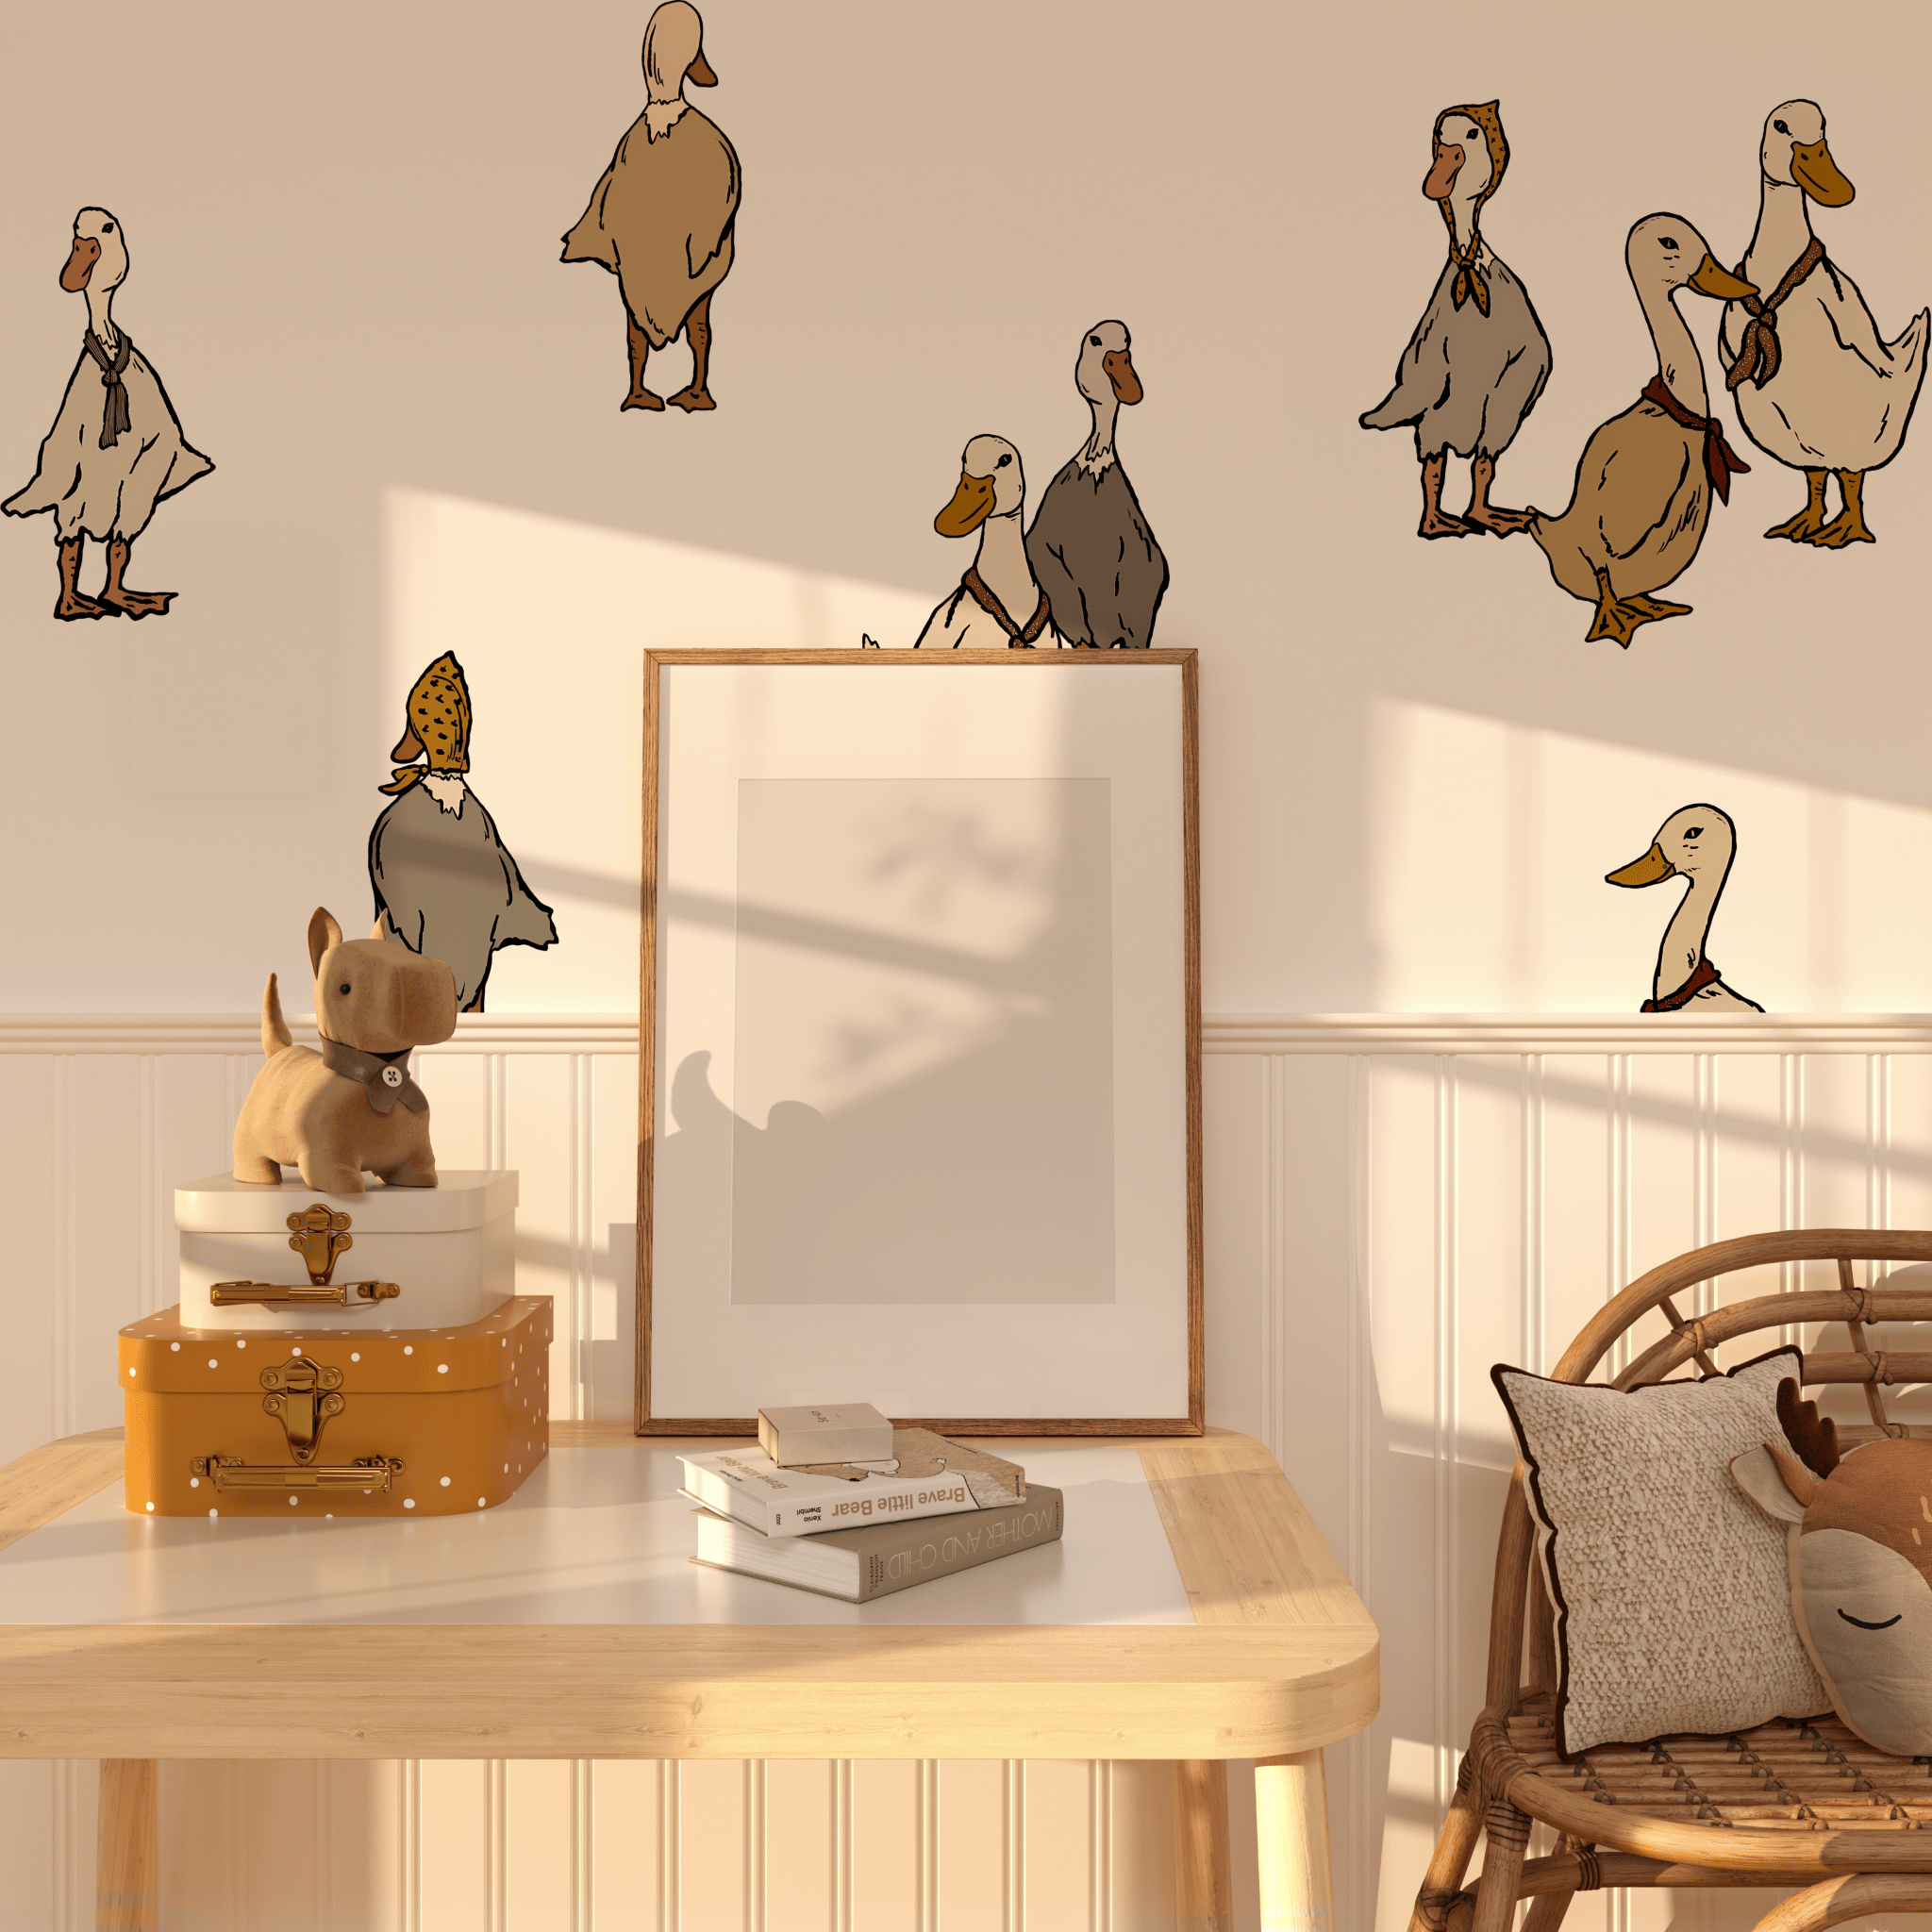 A variety of duck and goose wall decals in a vintage boho style displayed in a cozy corner with a wooden table, a small animal figurine, decorative boxes, and a wicker chair with a cushion